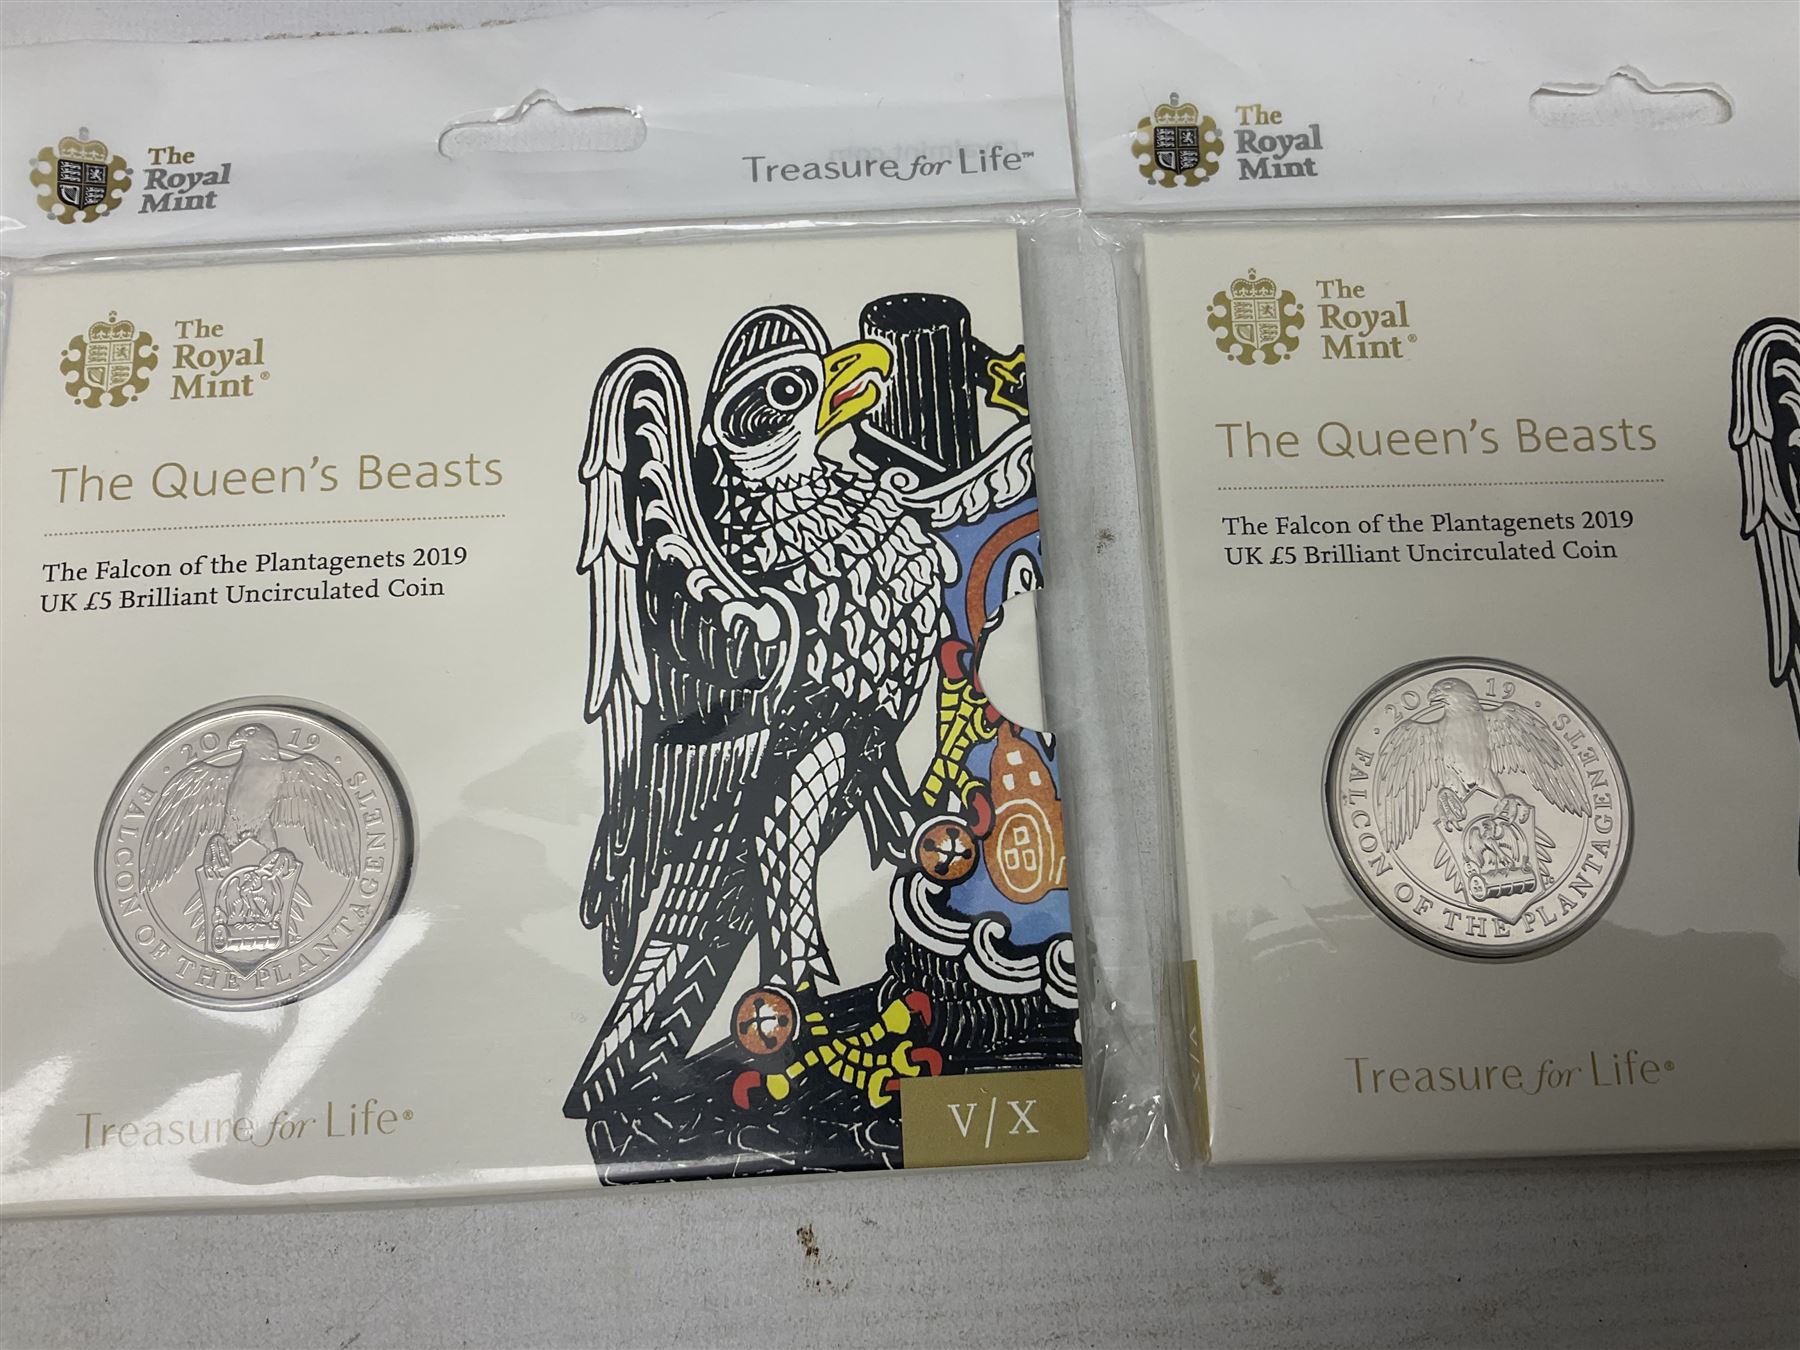 Seven The Royal Mint United Kingdom brilliant uncirculated commemorative five pound coins - Image 6 of 7